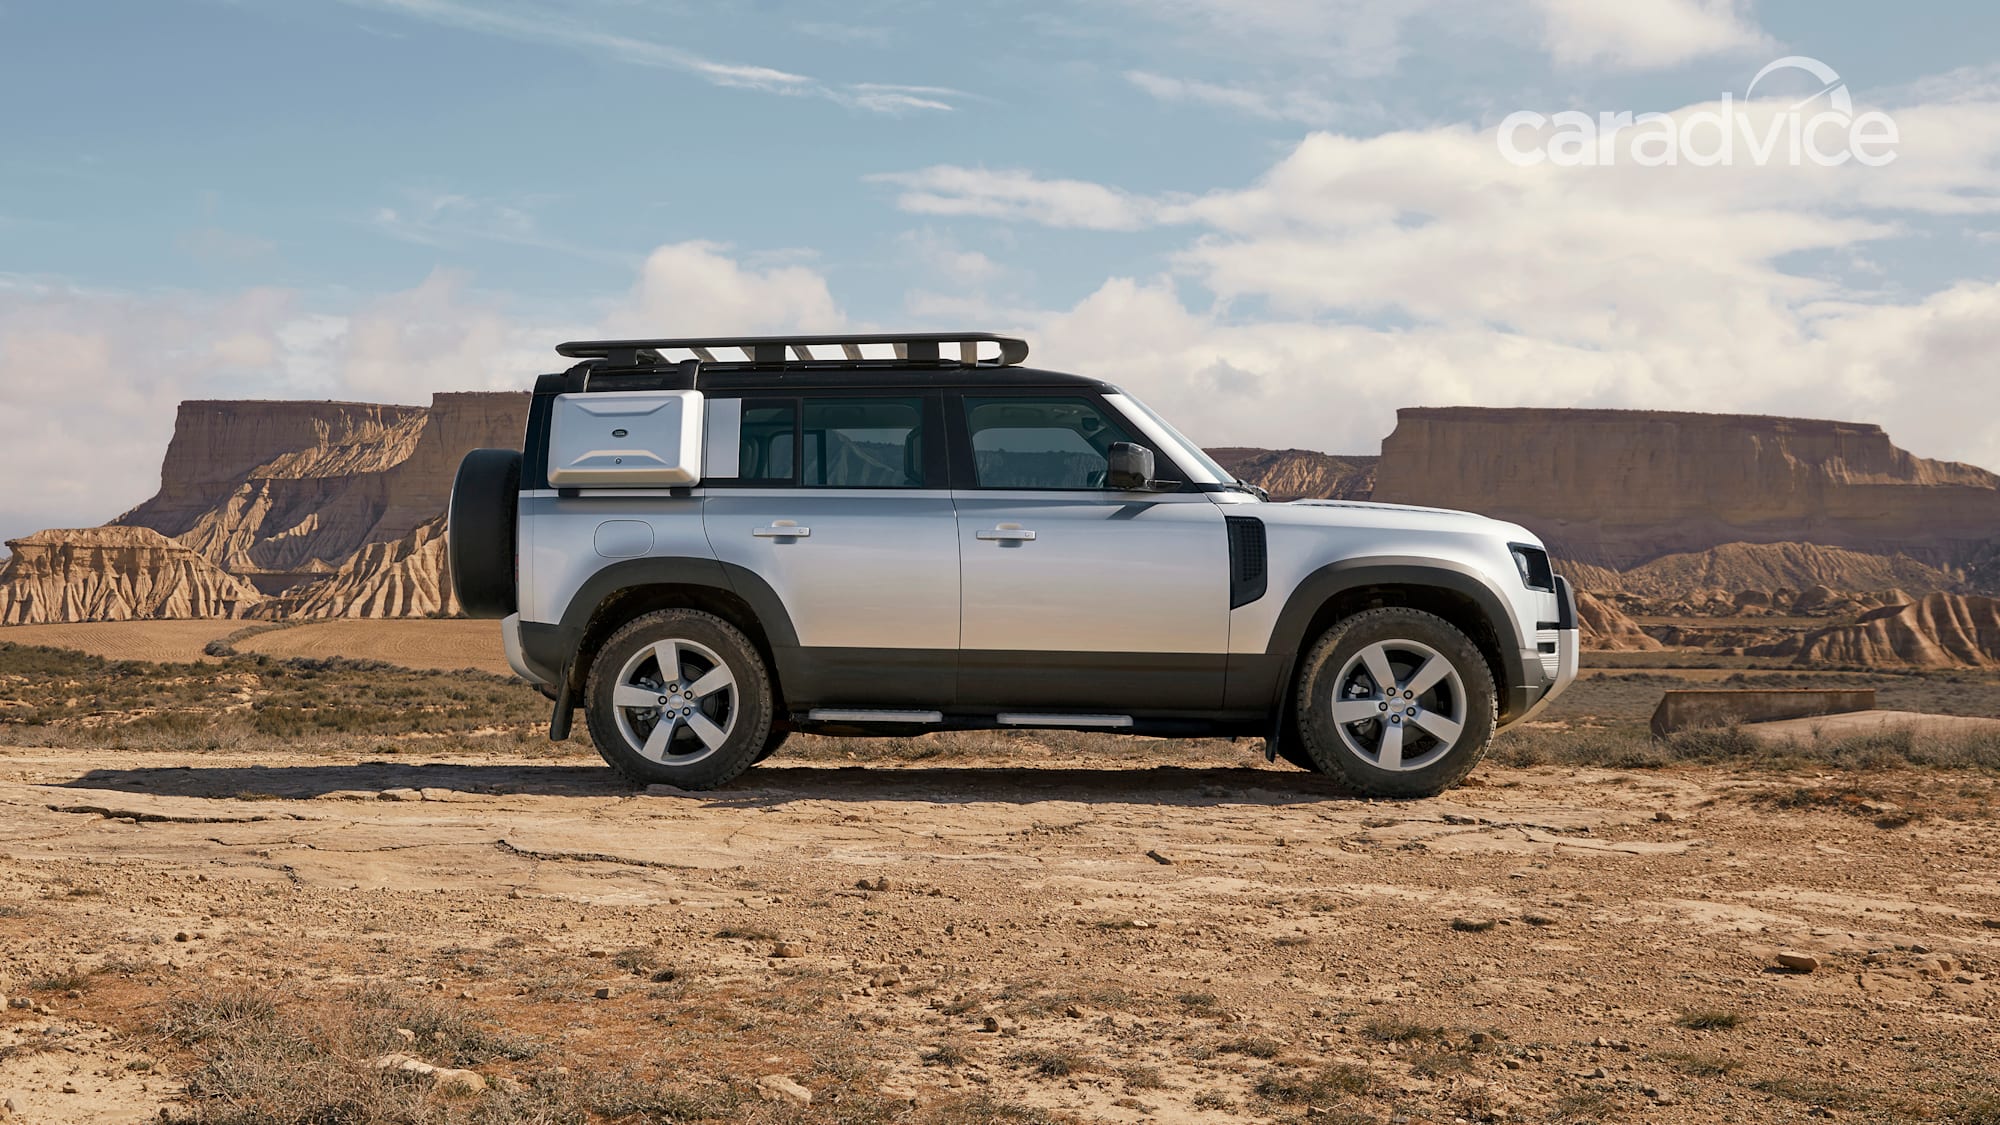 2020 Land Rover Defender 110 pricing and specs | CarAdvice